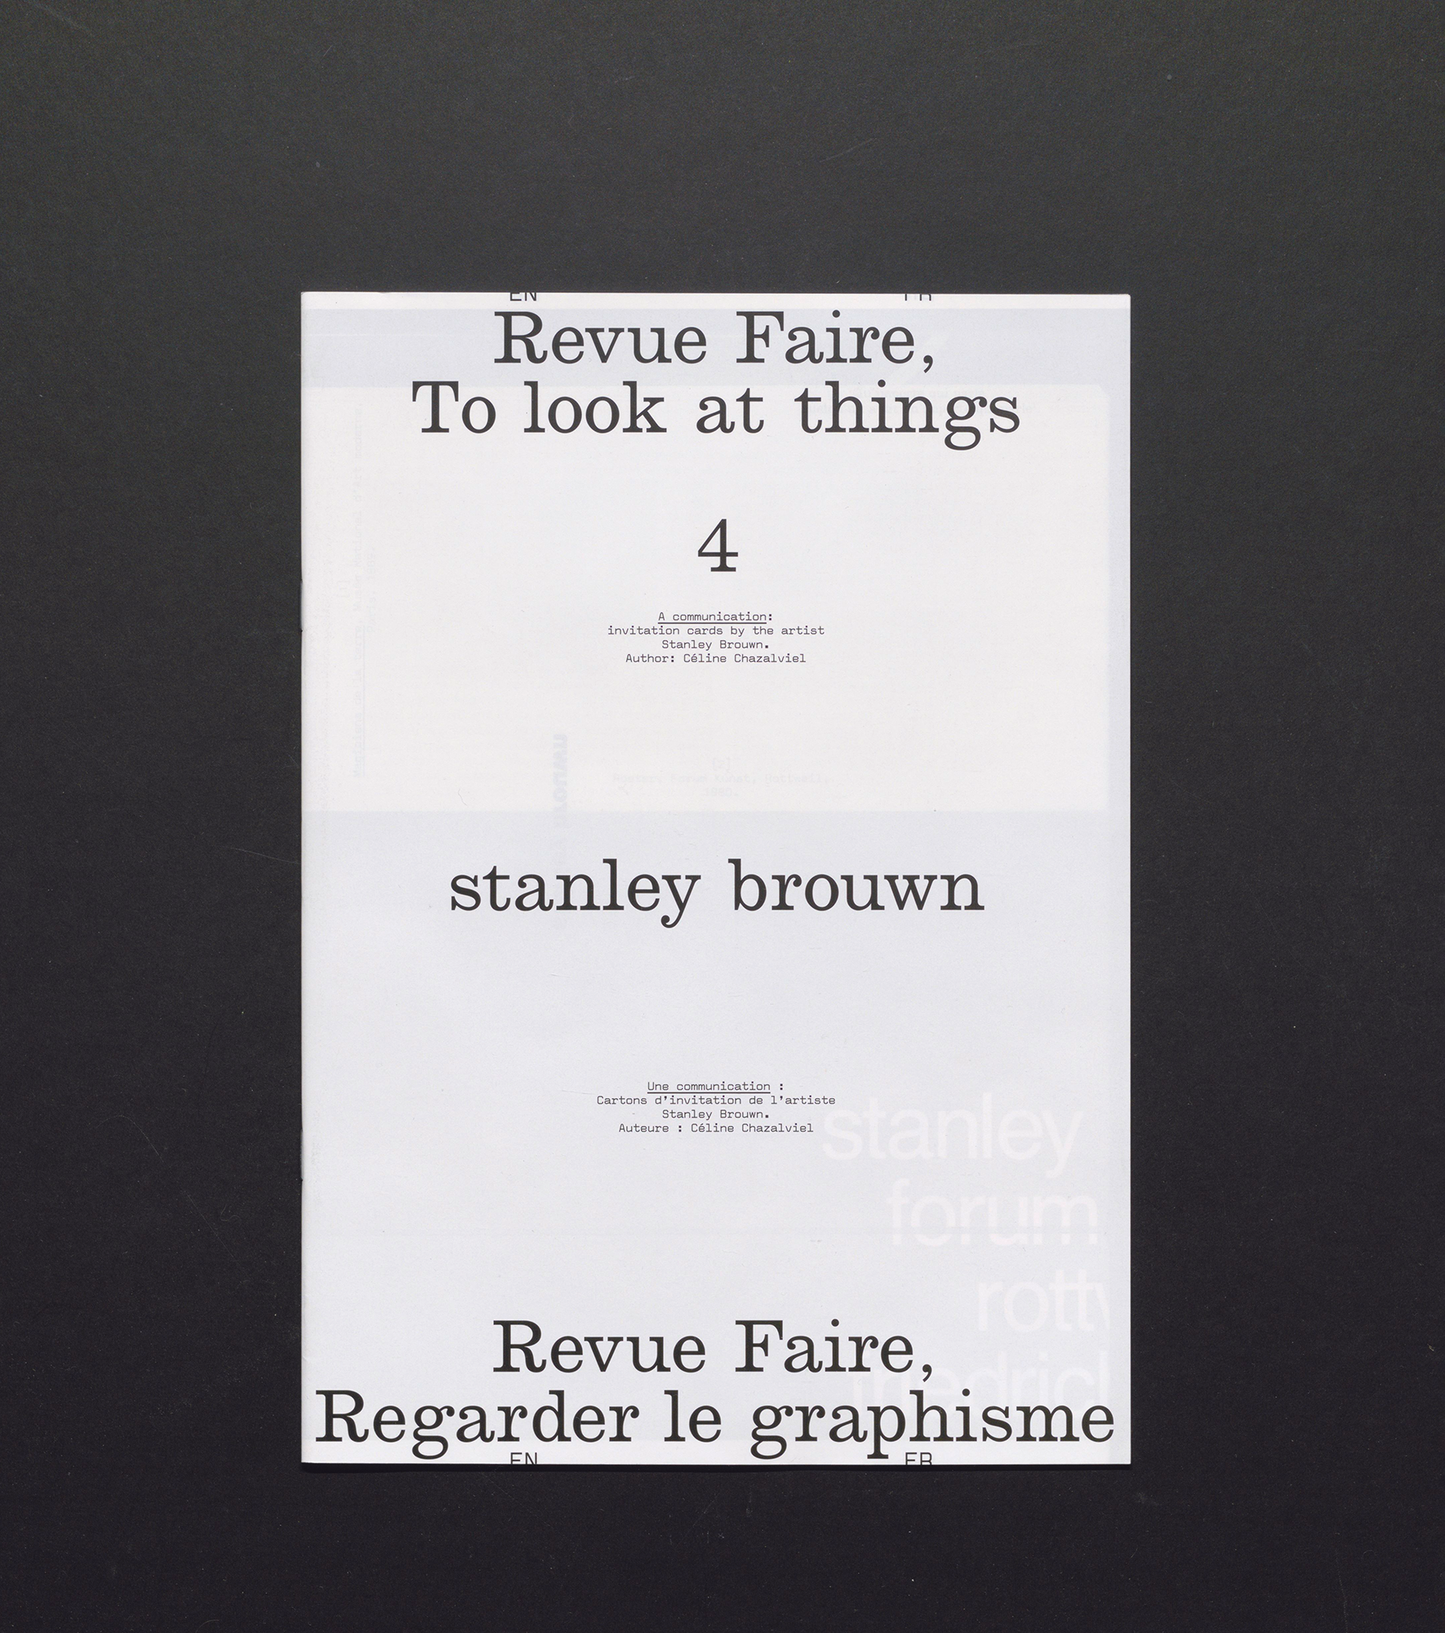 Revue Faire No. 04 - A communication: invitation cards by the artist Stanley Brouwn.